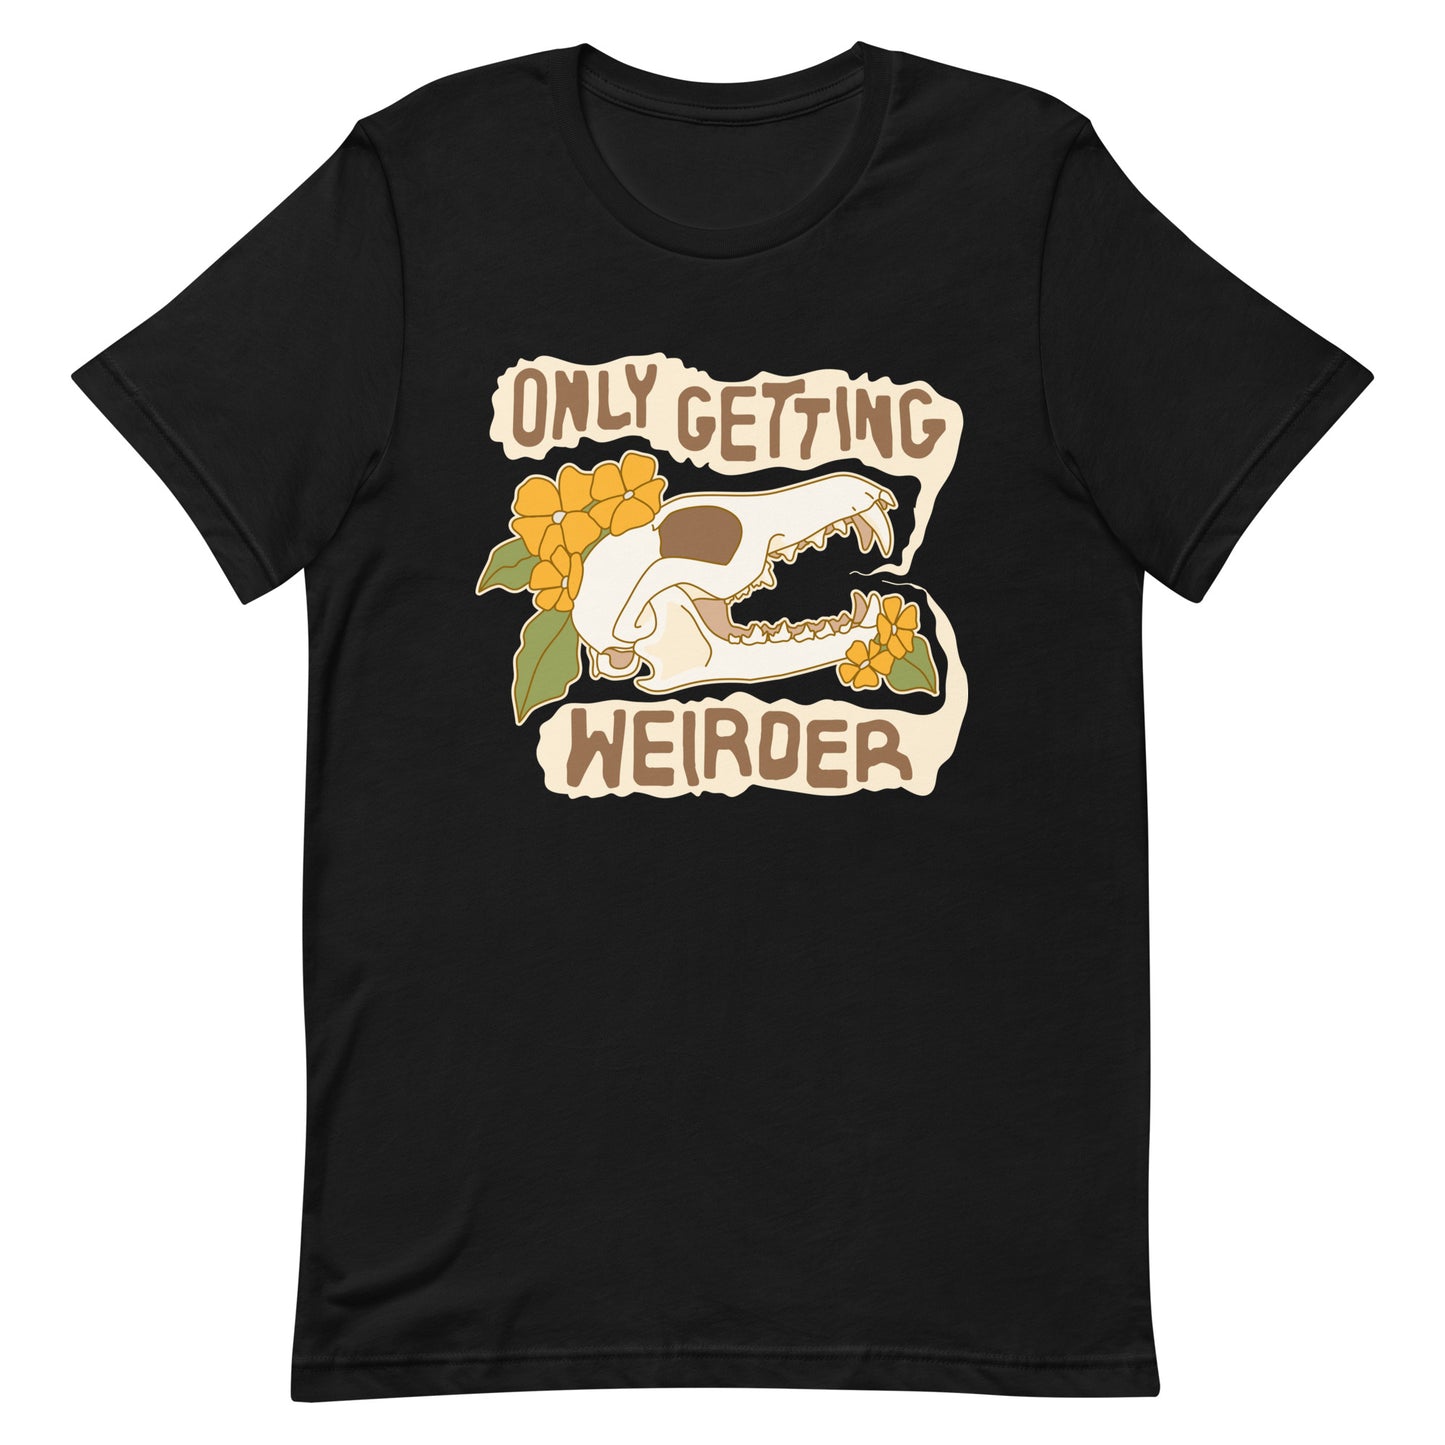 A black t-shirt featuirng an illustration of a fox skull surrounded by yellow flowers. Wobbly speech bubbles are coming from the fox's mouth. Text inside the bubbles reads "ONLY GETTING WEIRDER'.